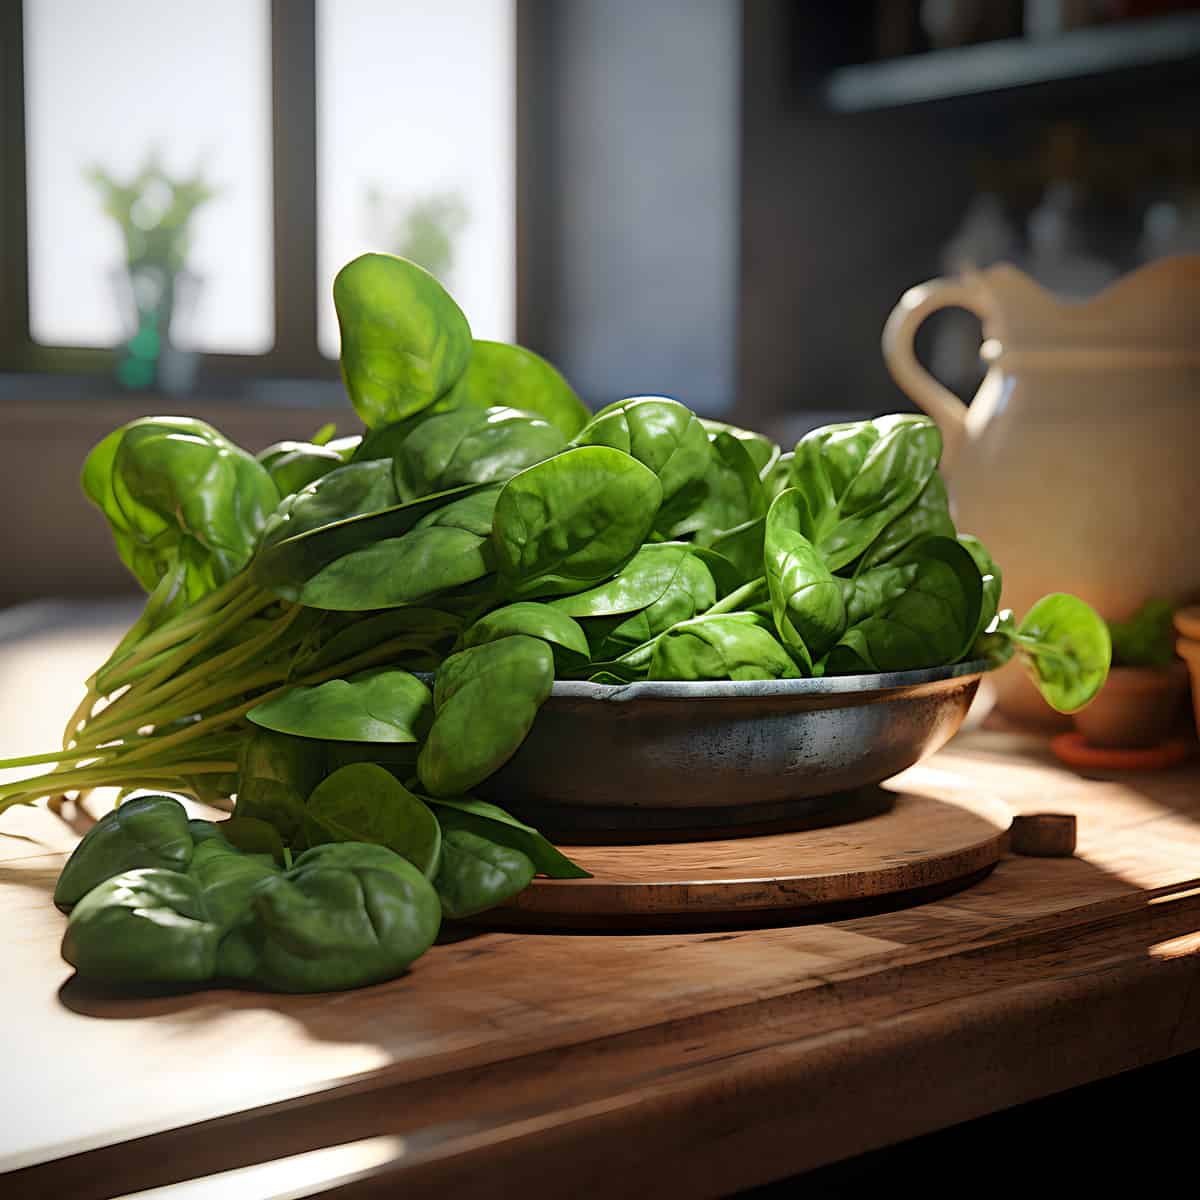 Spinach on a kitchen counter